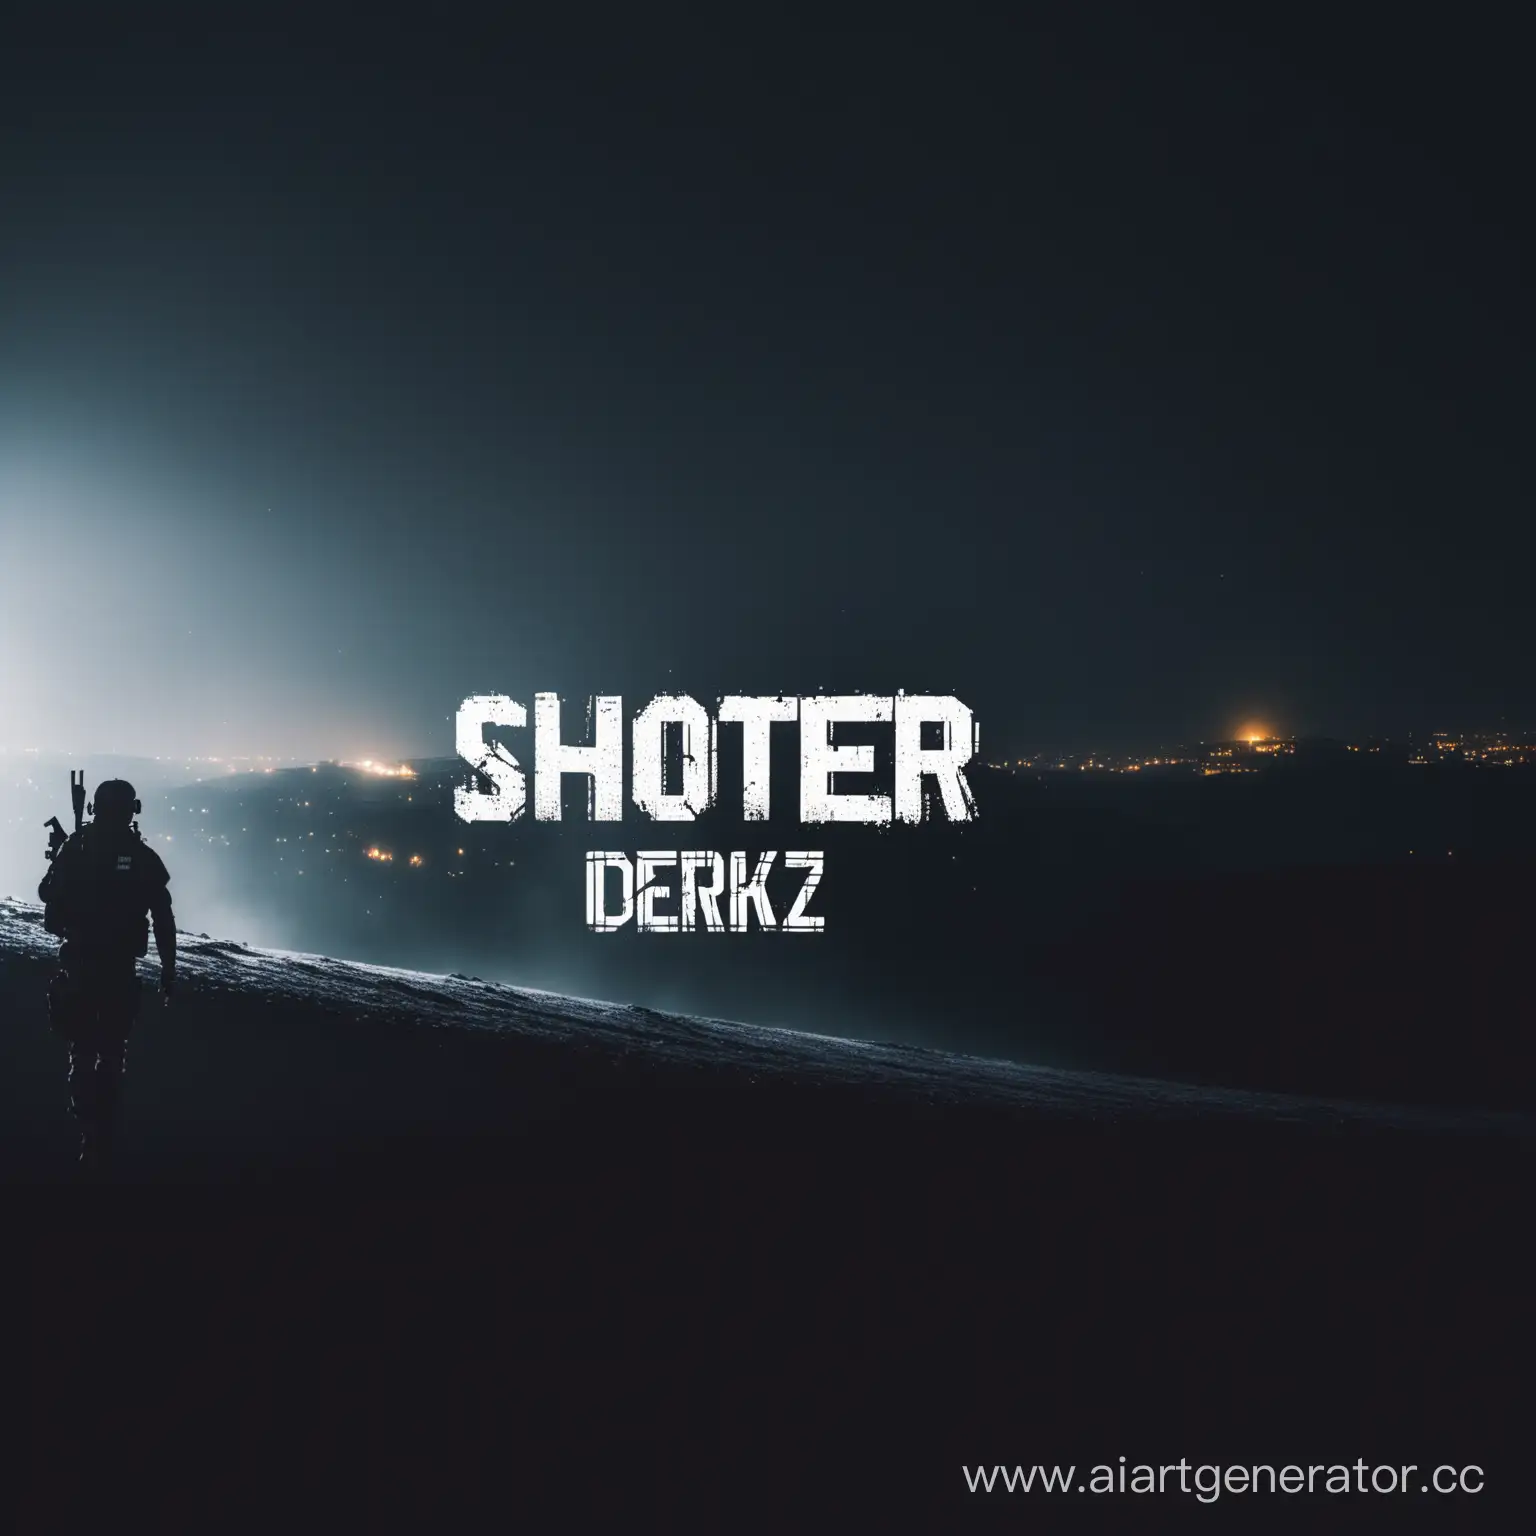 Epic-Shooter-Photo-with-Derkz-Inscription-Background